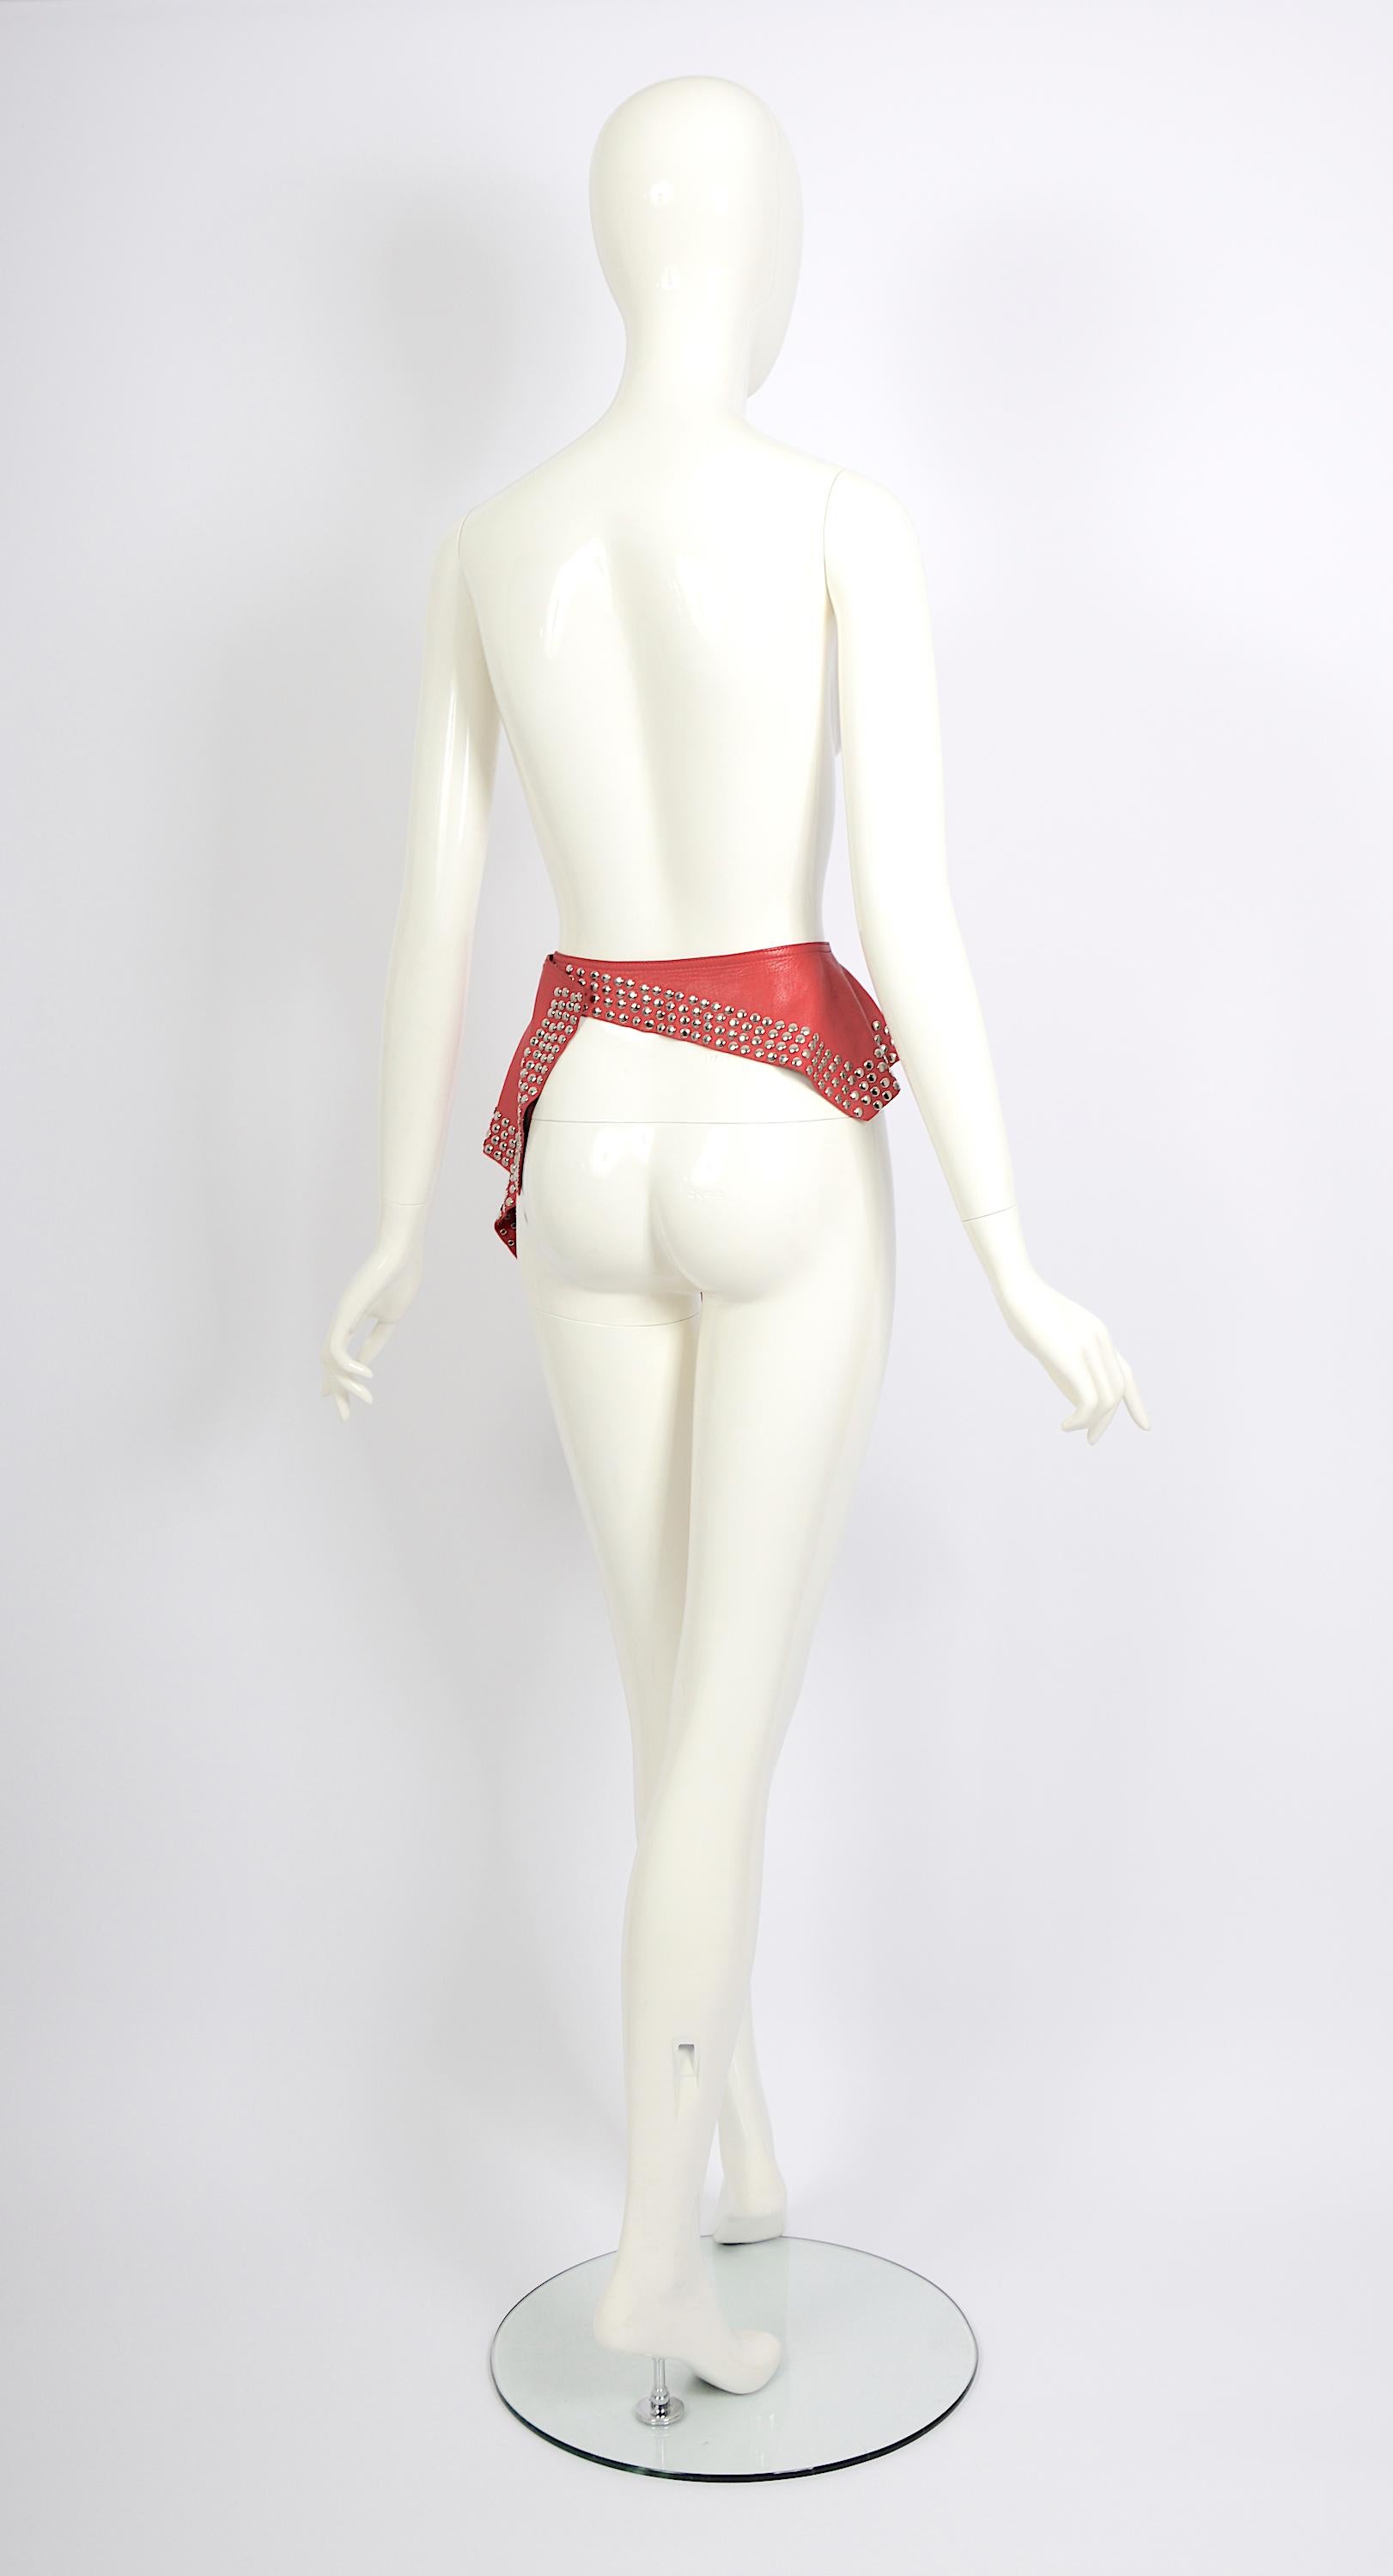 Azzedine Alaia circa 1981 collectionneurs Studded embellished red leather belt skirt en vente 2